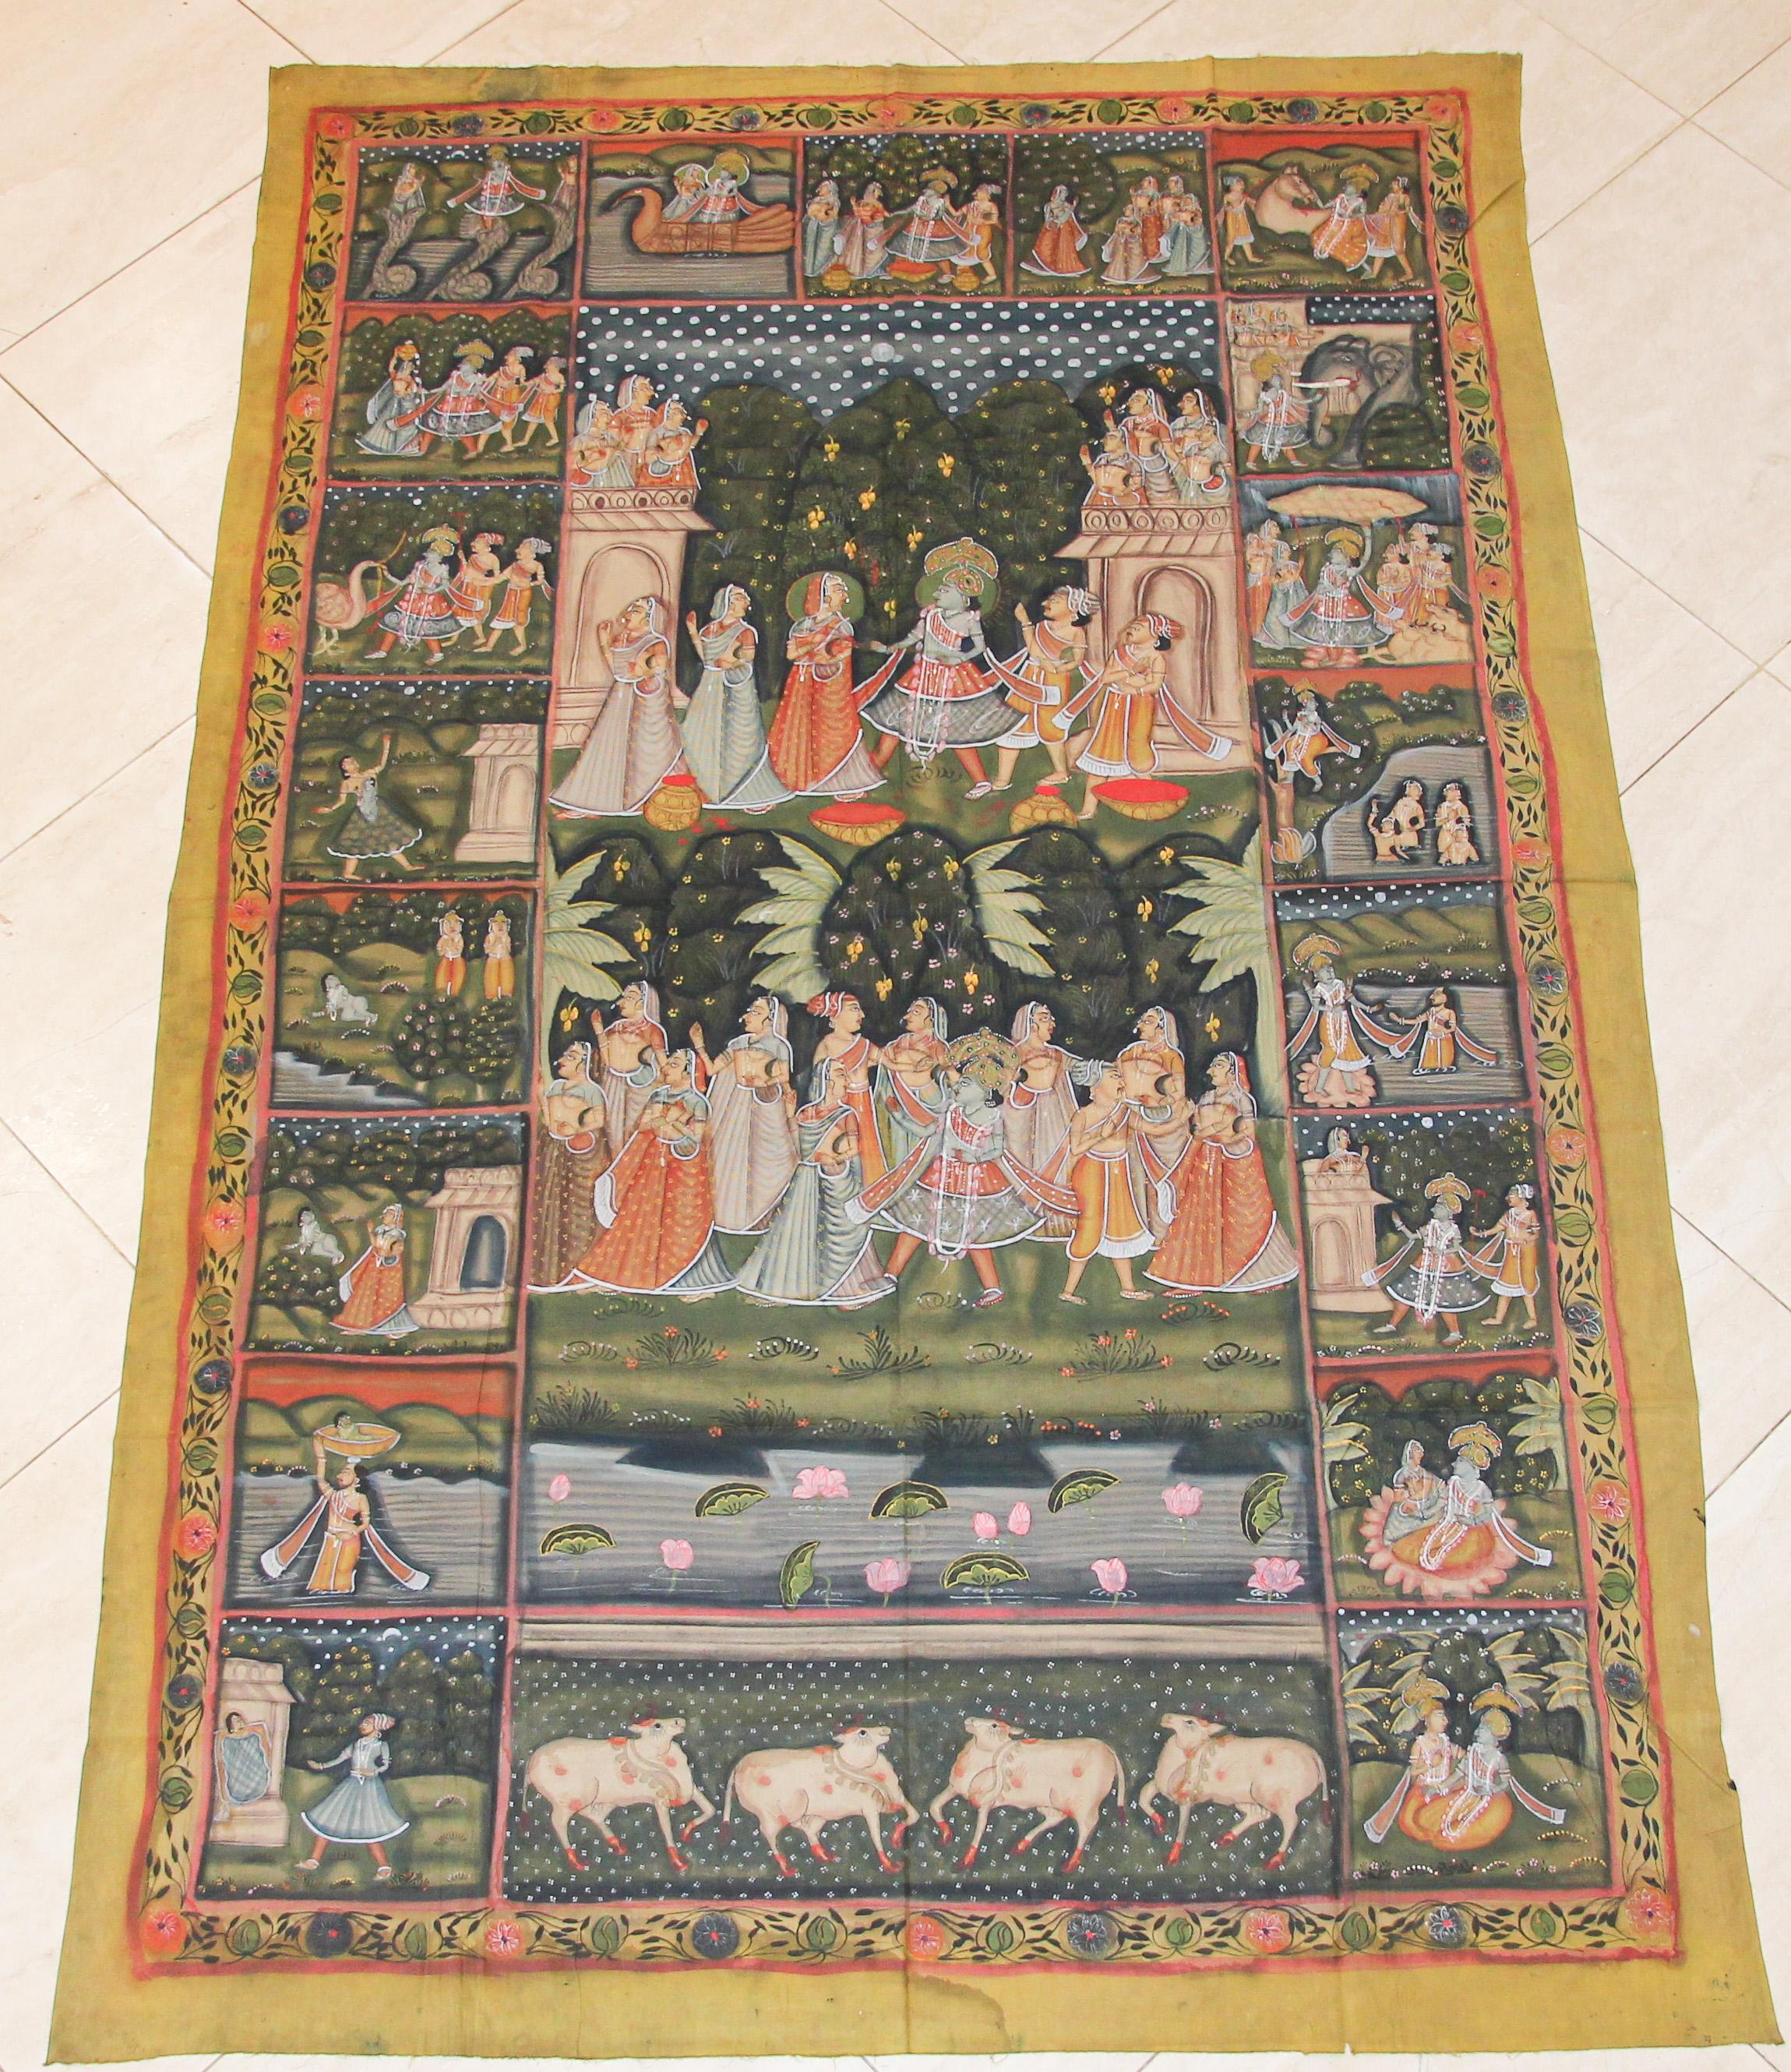 A large Pichhavai painting depicting Krishna, represented in multiple places with female Gopis dancing and offering, great colors, the composition is enclosed in a lush green forest and the colors of the dresses in yellow and oranges play off